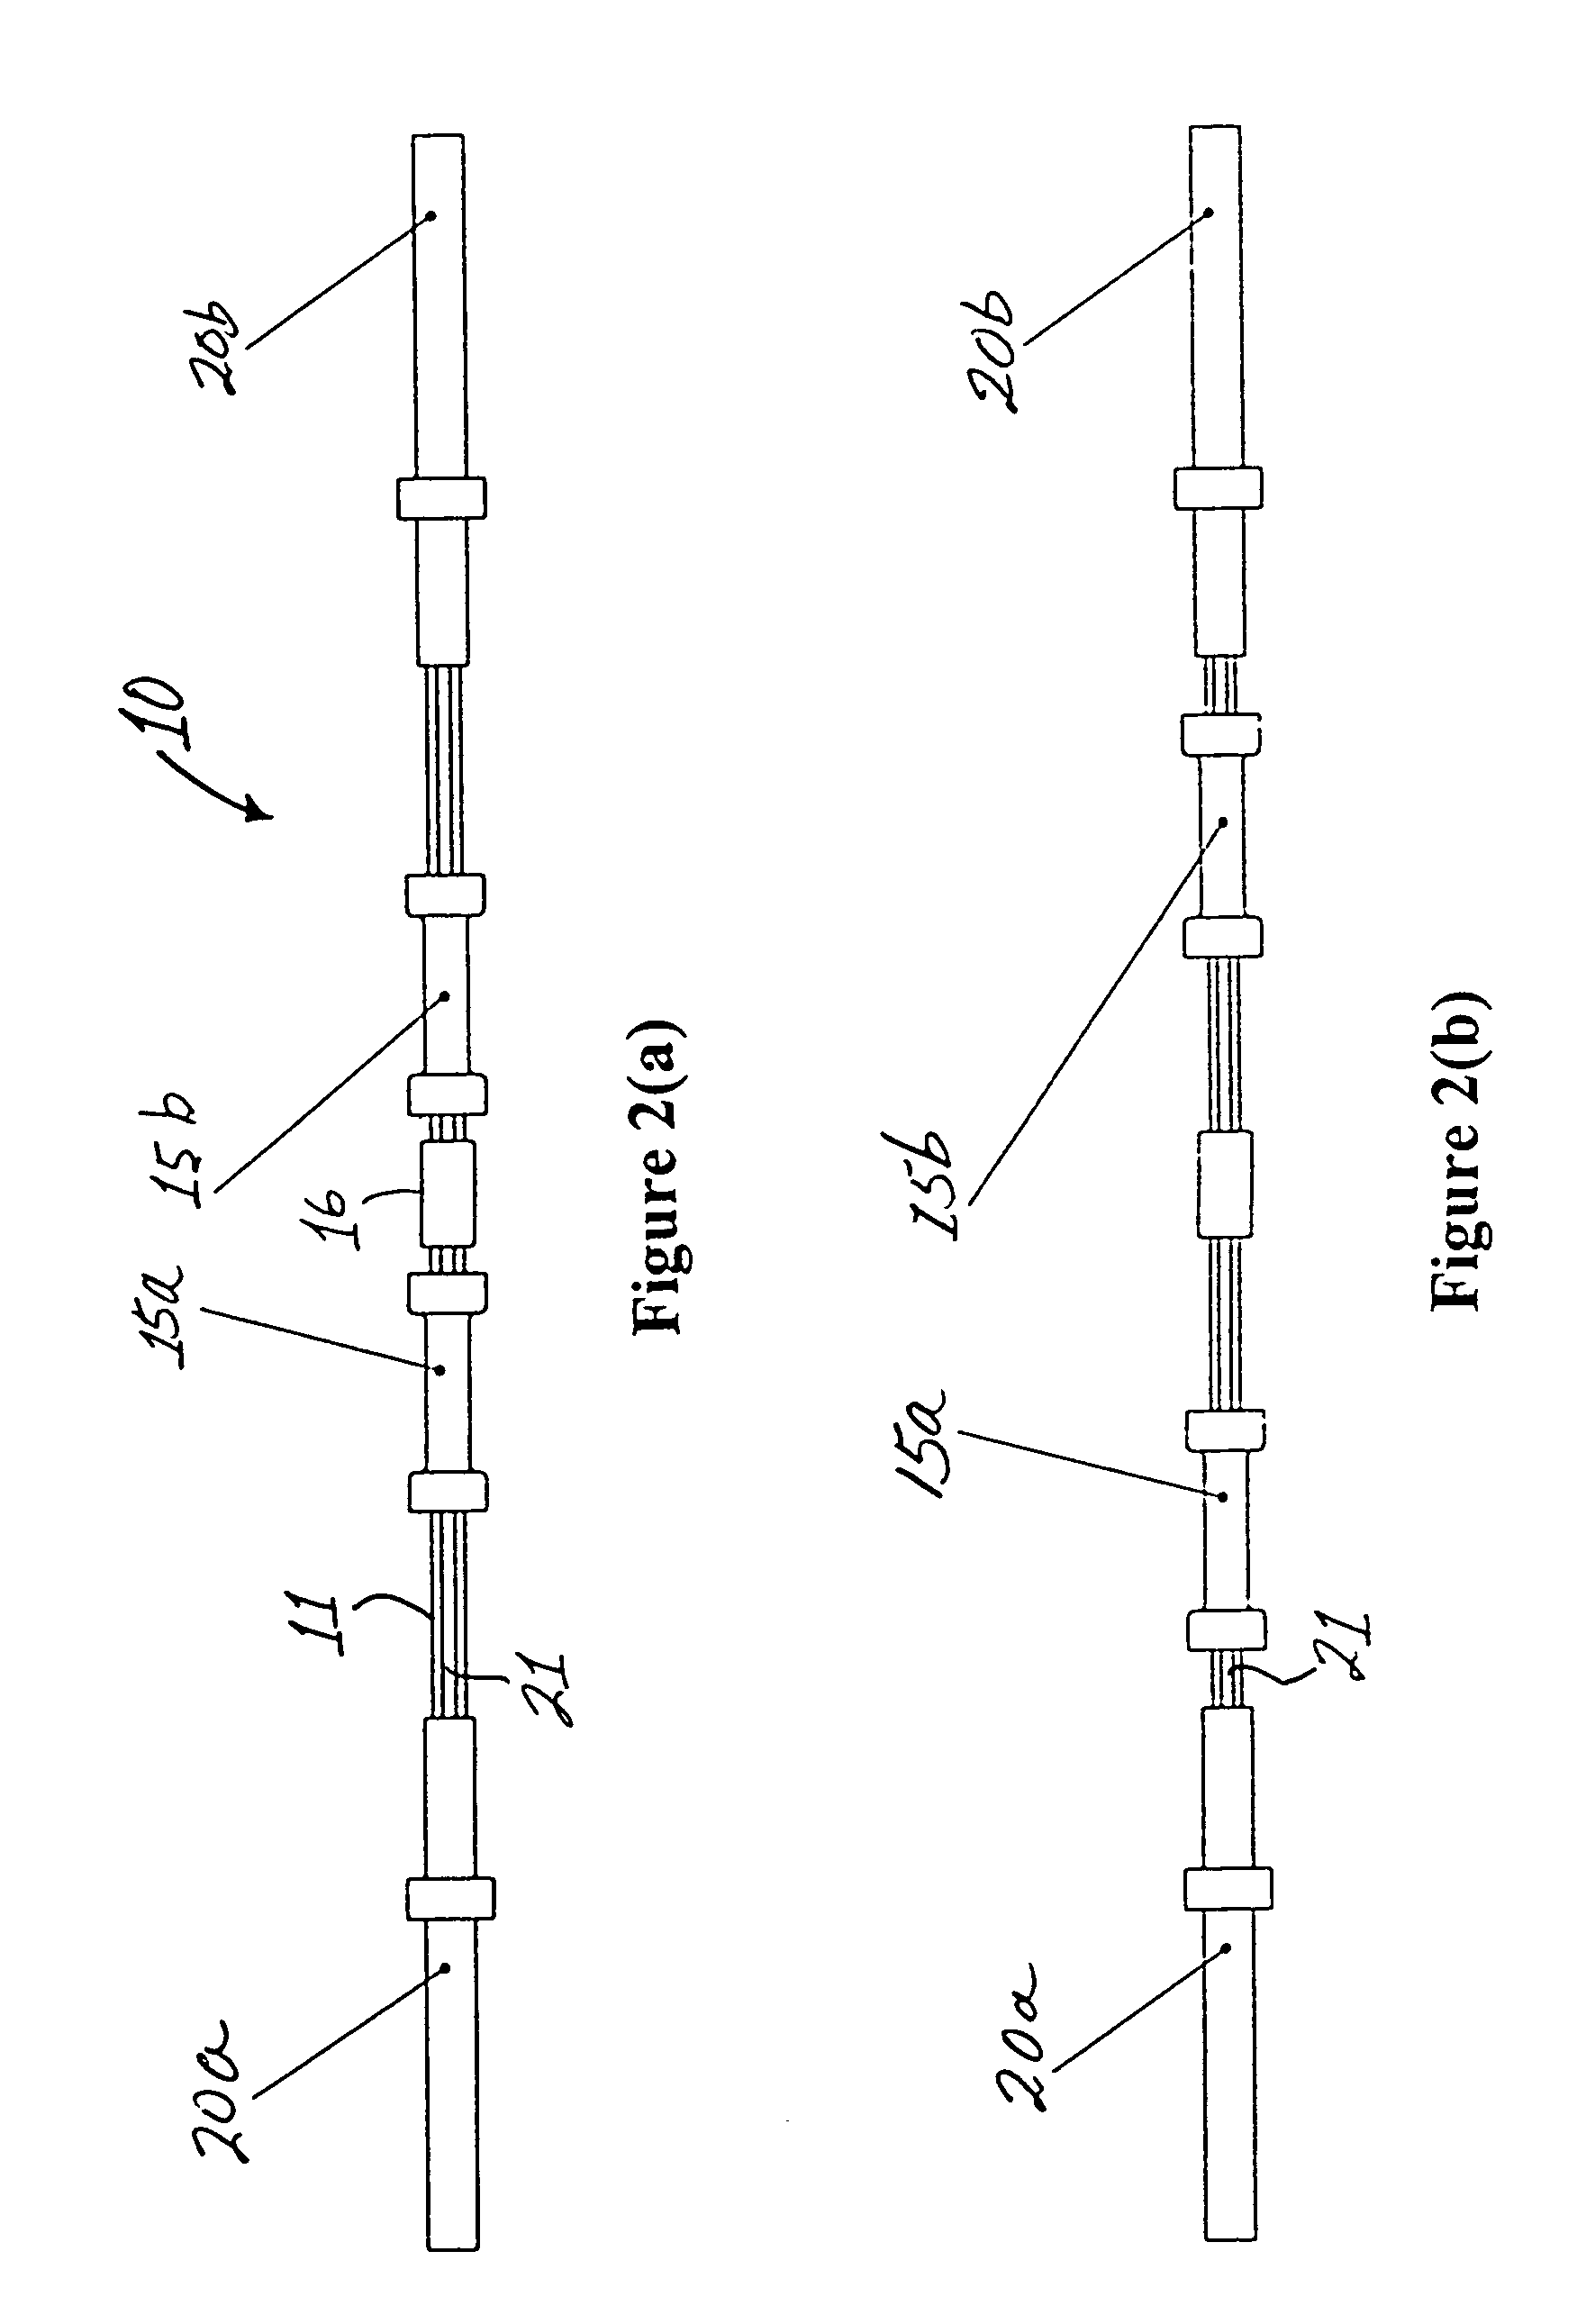 Bar with sliding handgrips for resistance exercise device